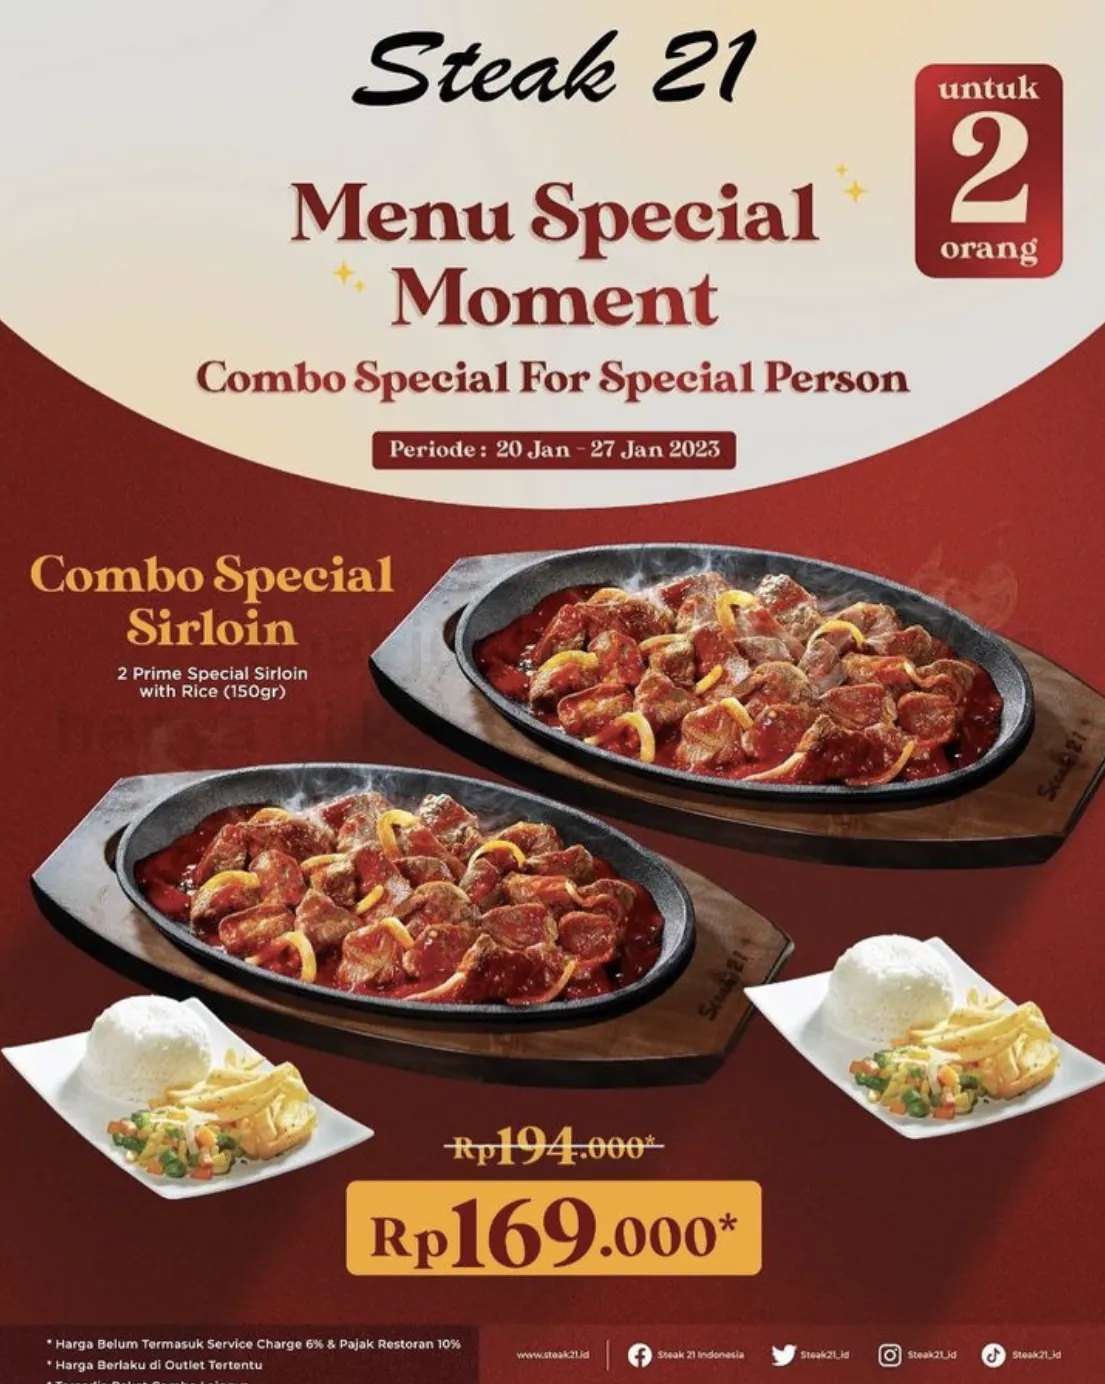 Steak 21 Promo Menu Special Moment Combo Special Sirloin Only Rp 169.000 For 2 Person*